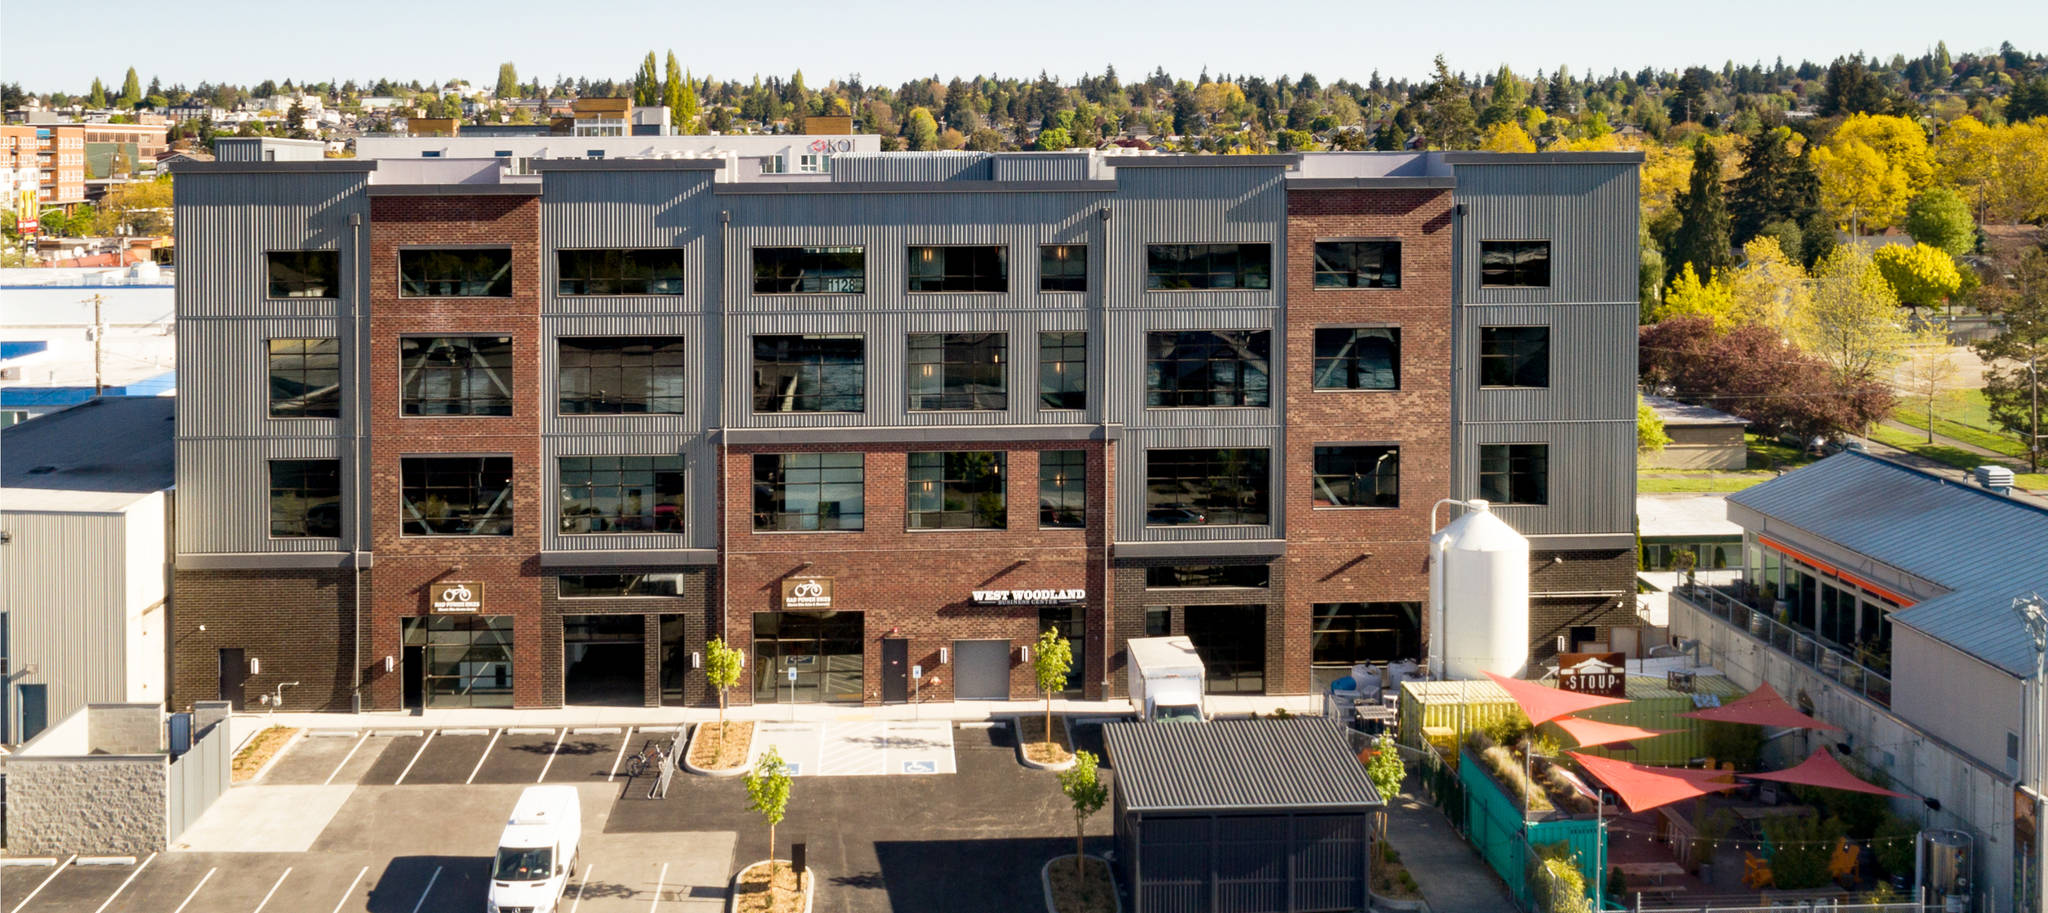 A project similar to the West Woodland Business Center in Ballard could be coming to the city-owned Naden Avenue property in Kent. COURTESY PHOTO, Avenue 55